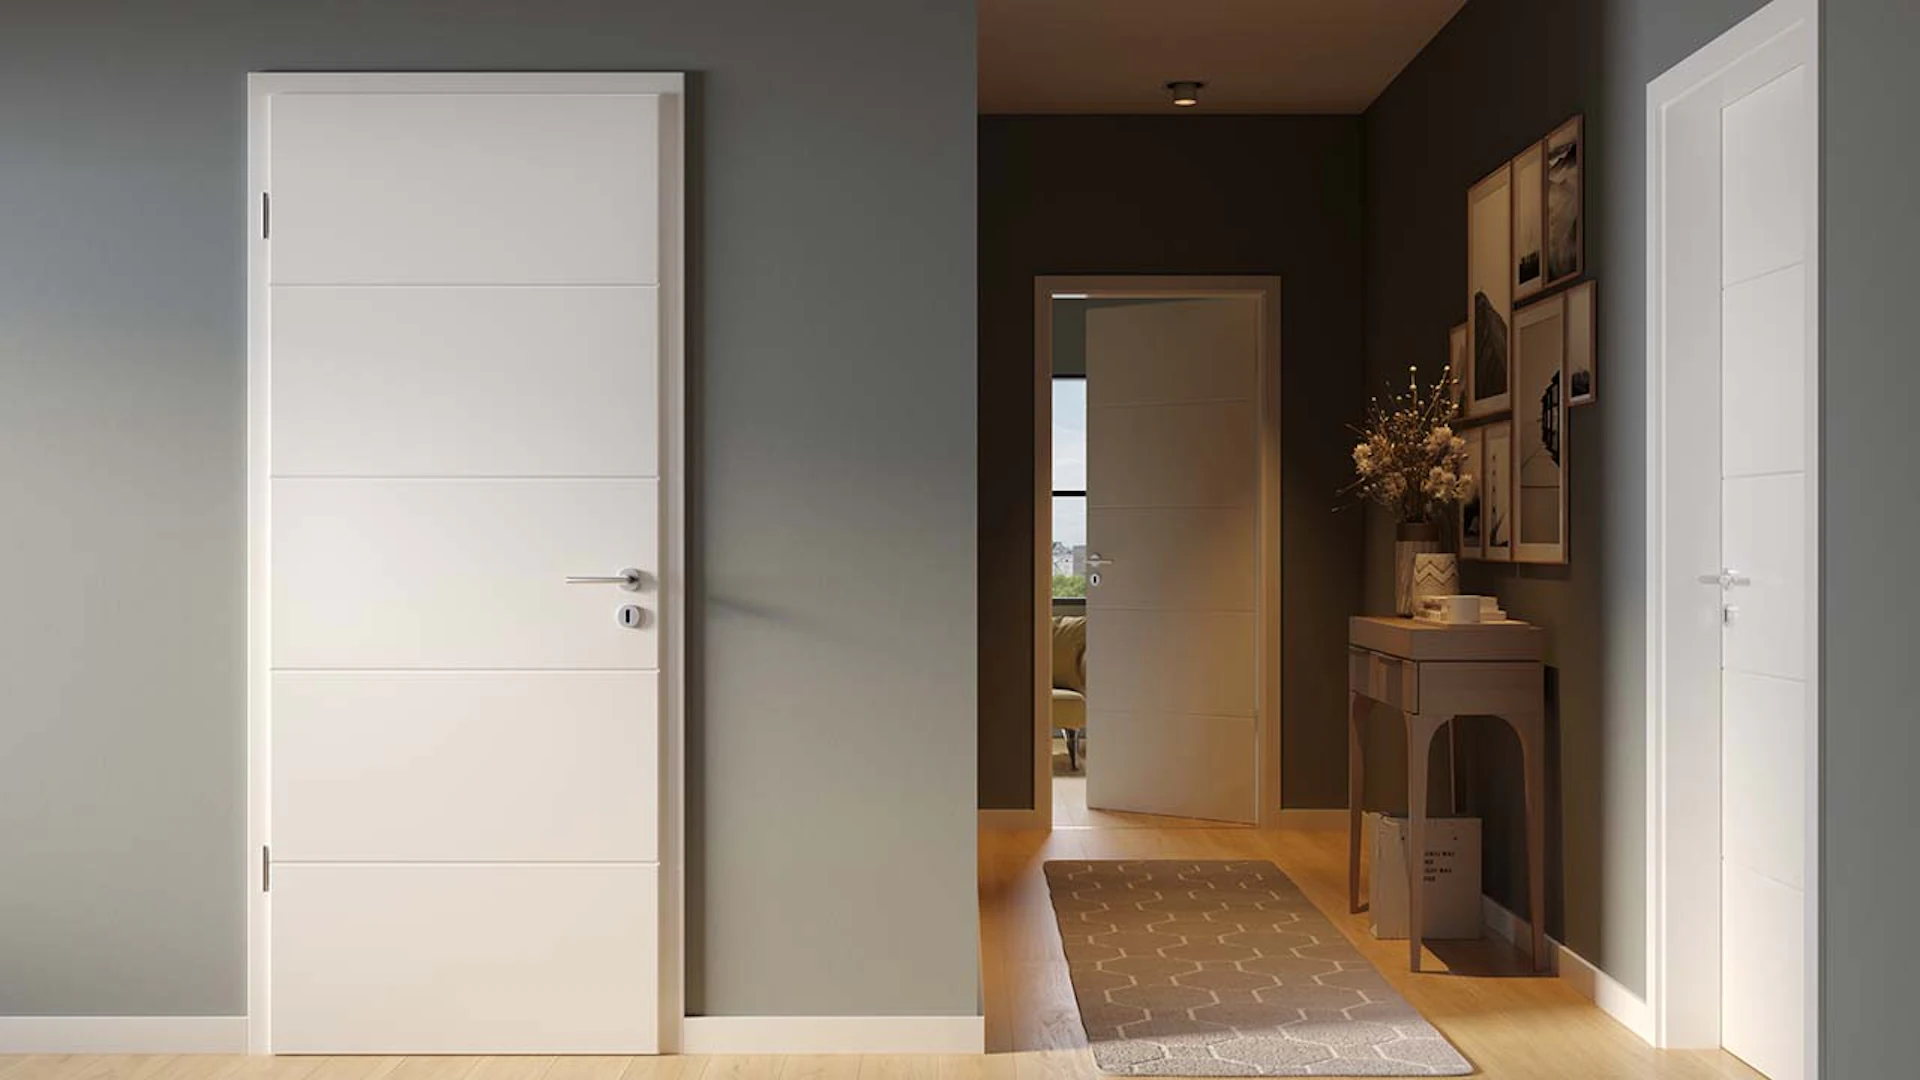 planeo interior door lacquer 2.0 - Kinga 9010 white lacquer 2110 x 610 mm DIN L - round RSP hinge 3-t